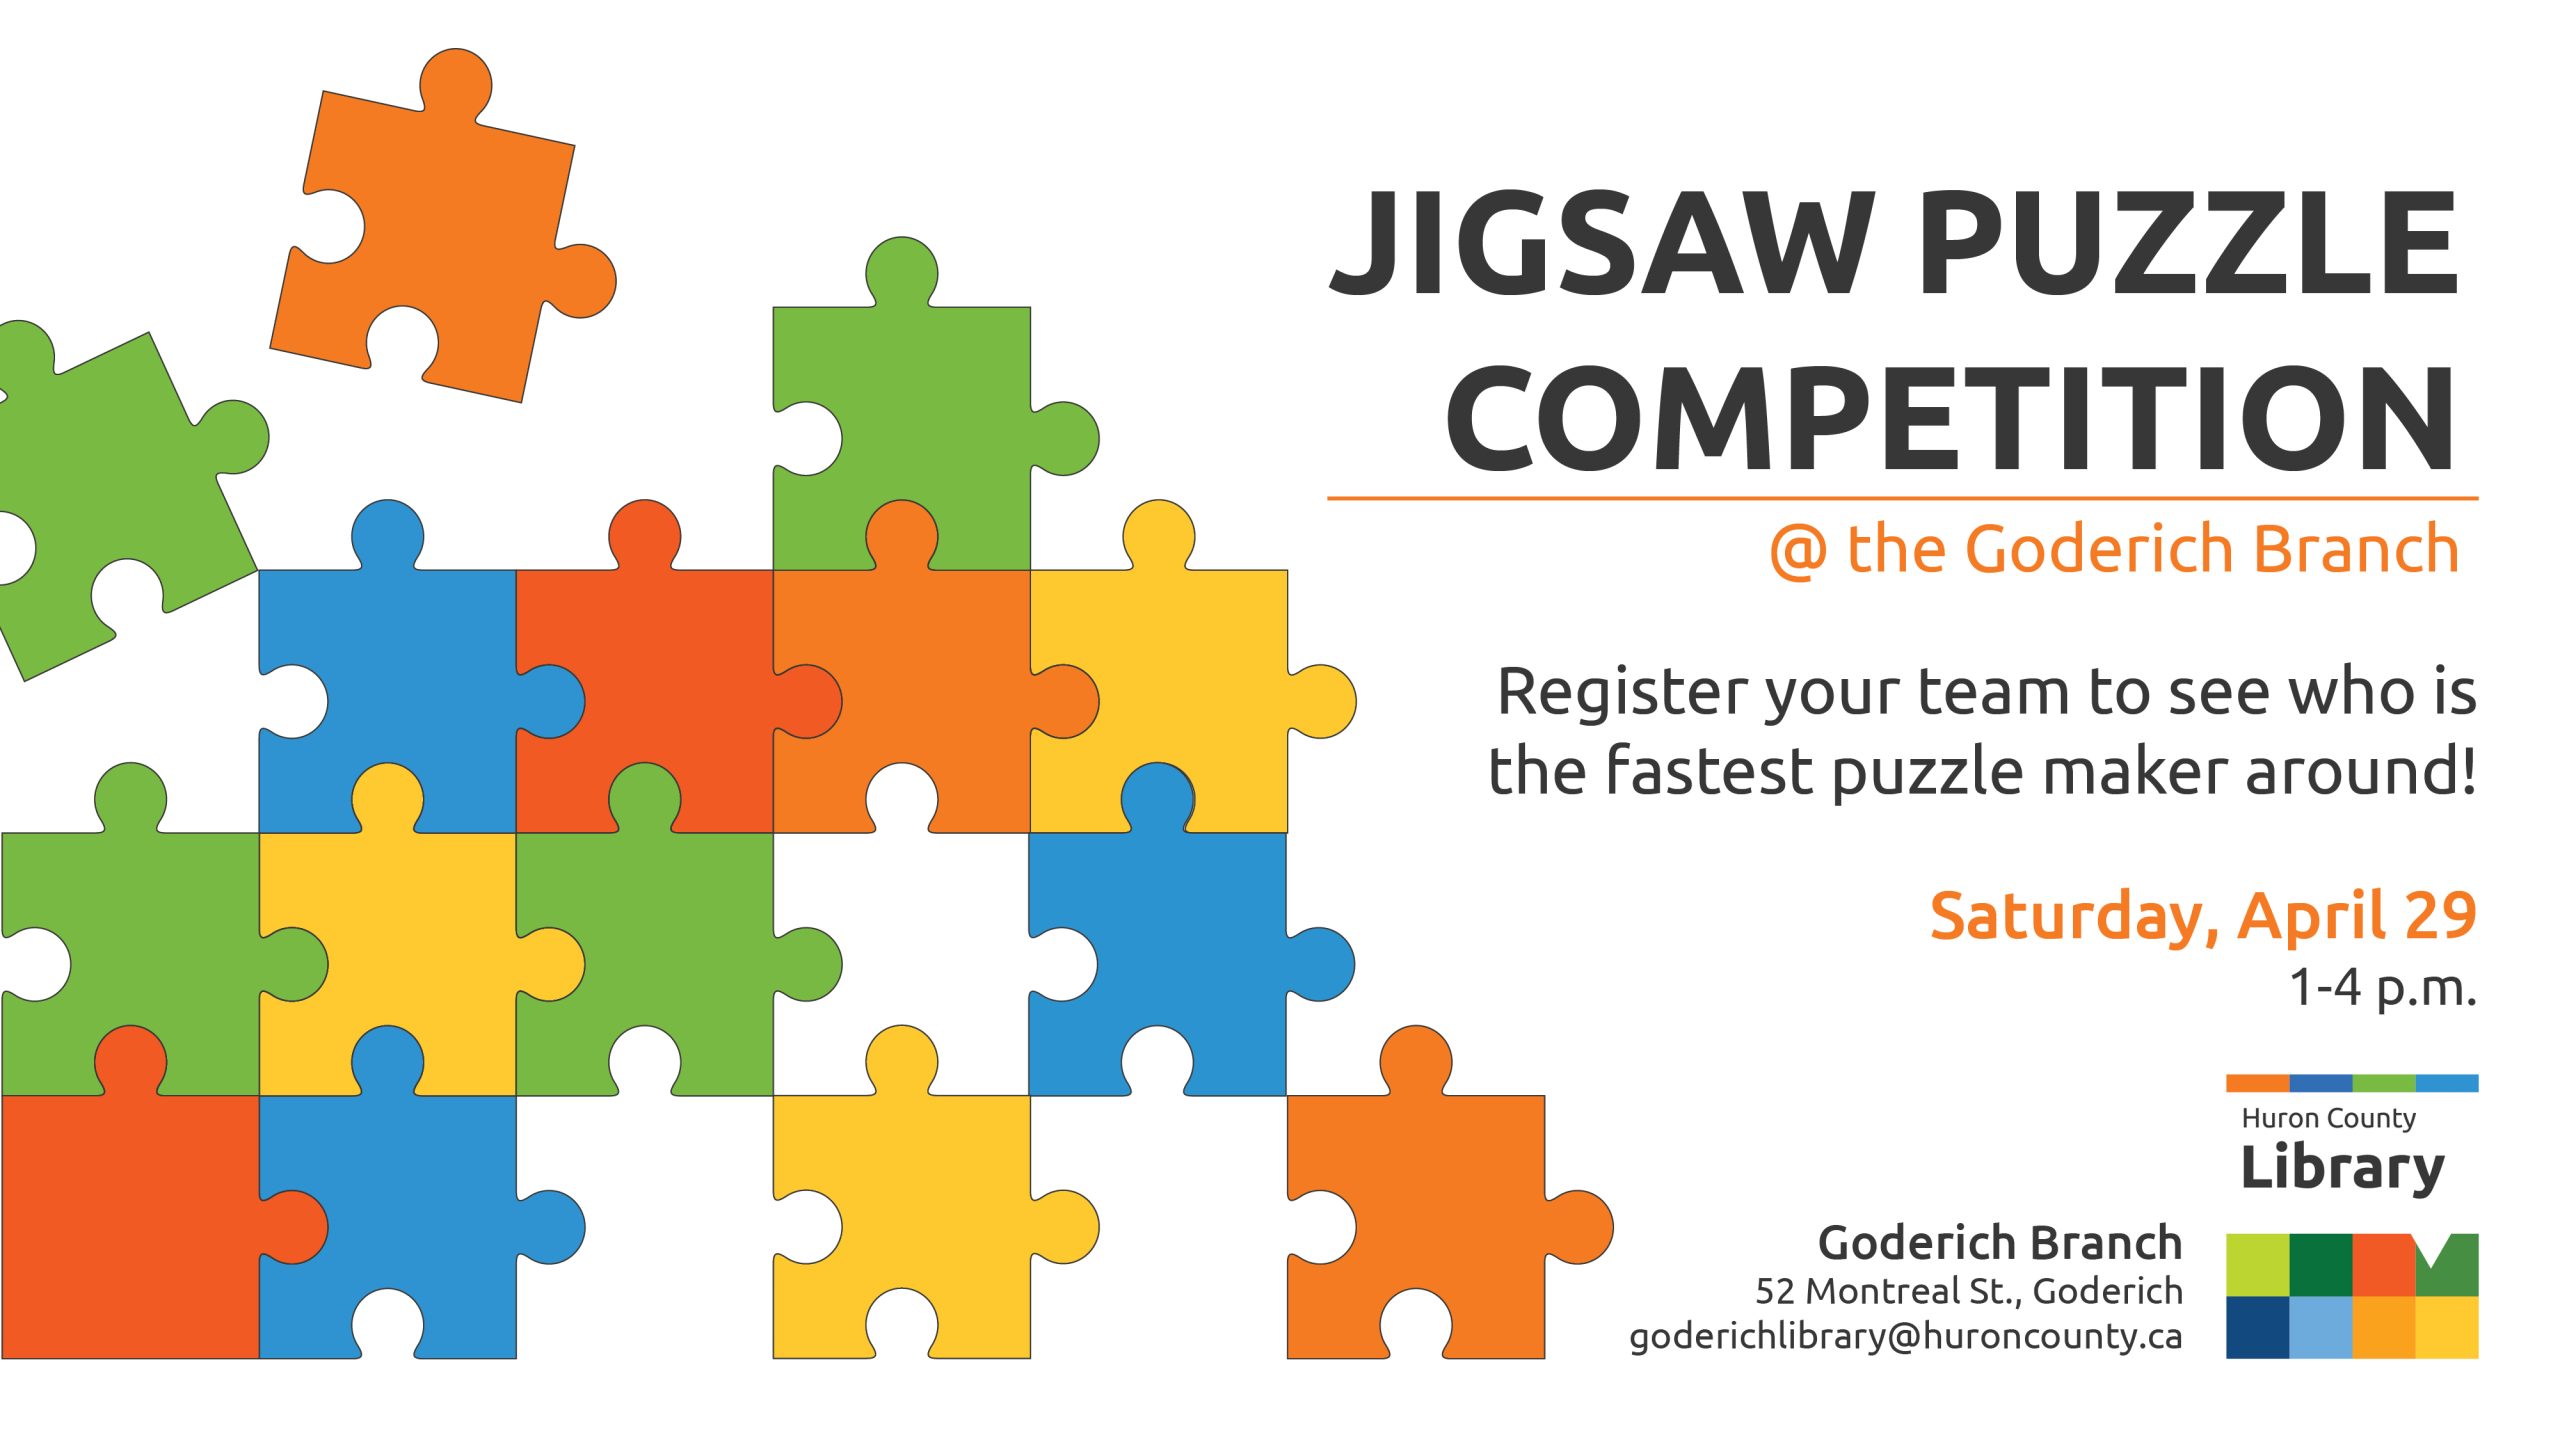 Illustration of puzzle pieces with text promoting puzzle competition at Goderich Branch.